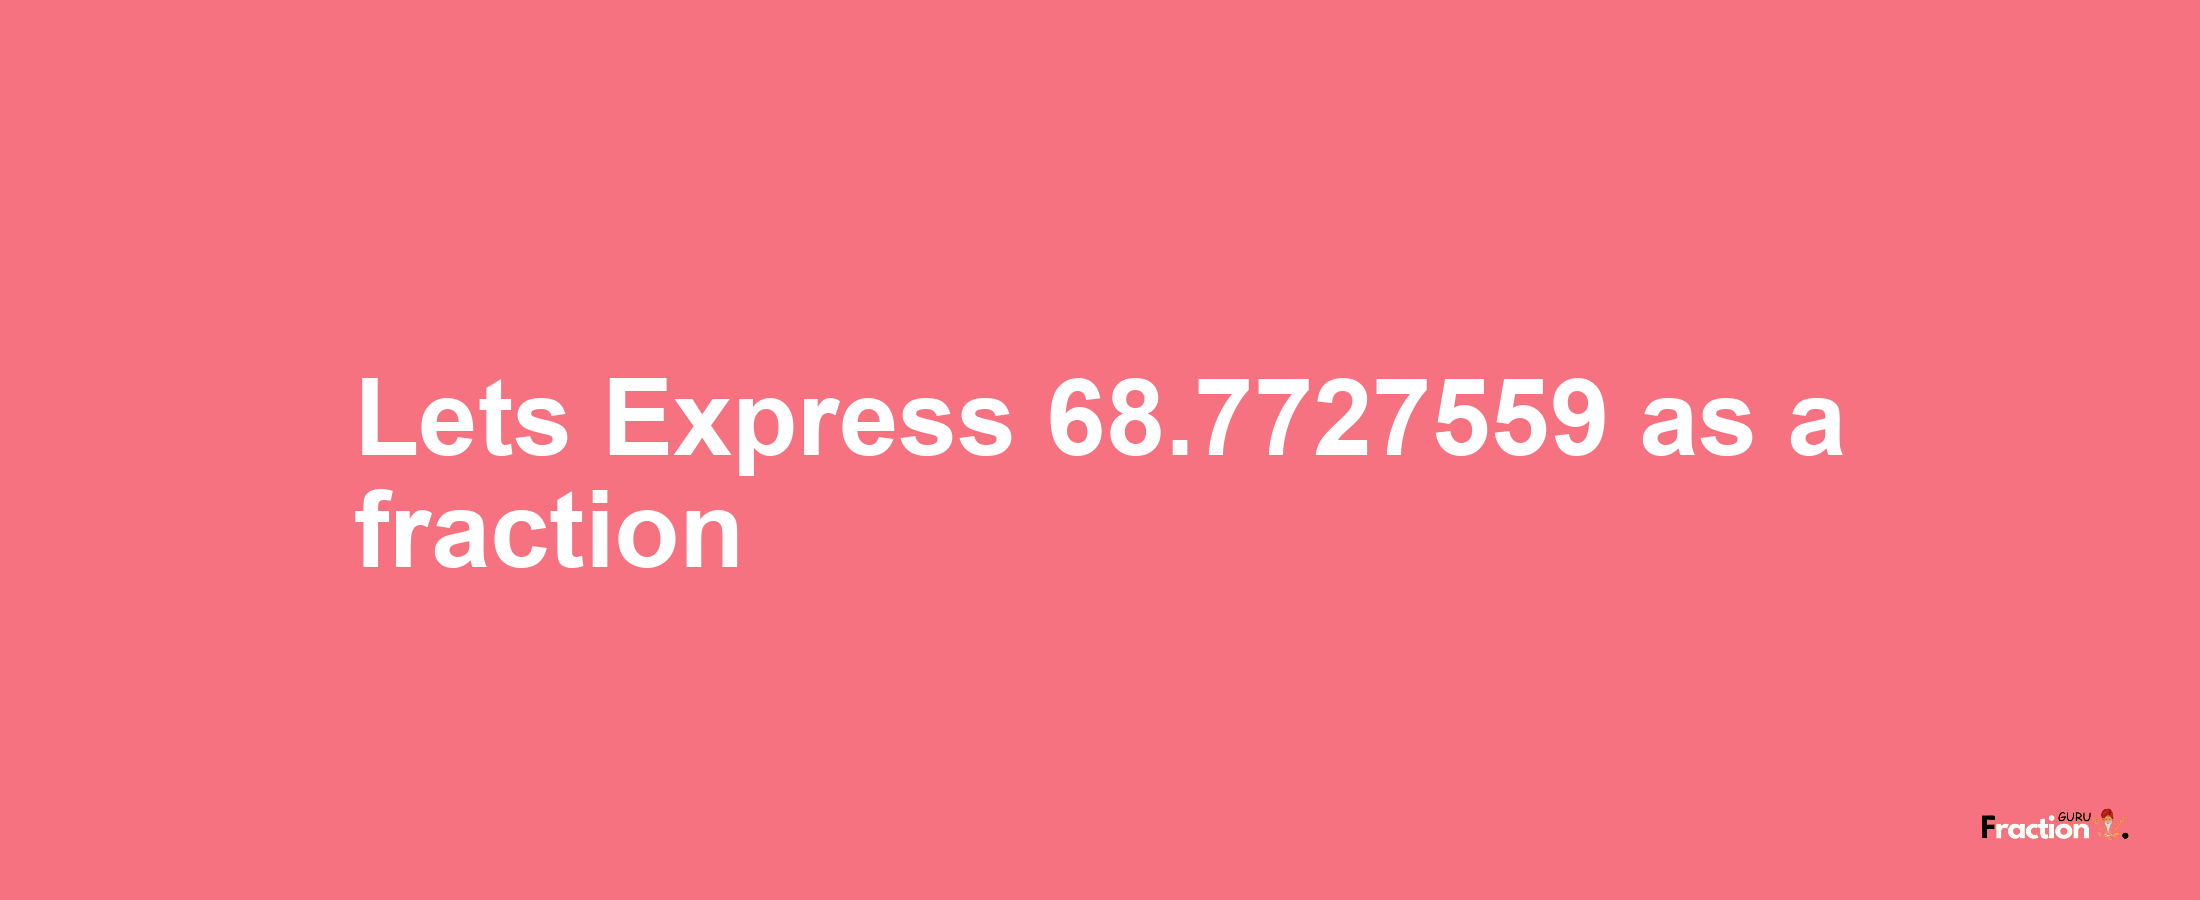 Lets Express 68.7727559 as afraction